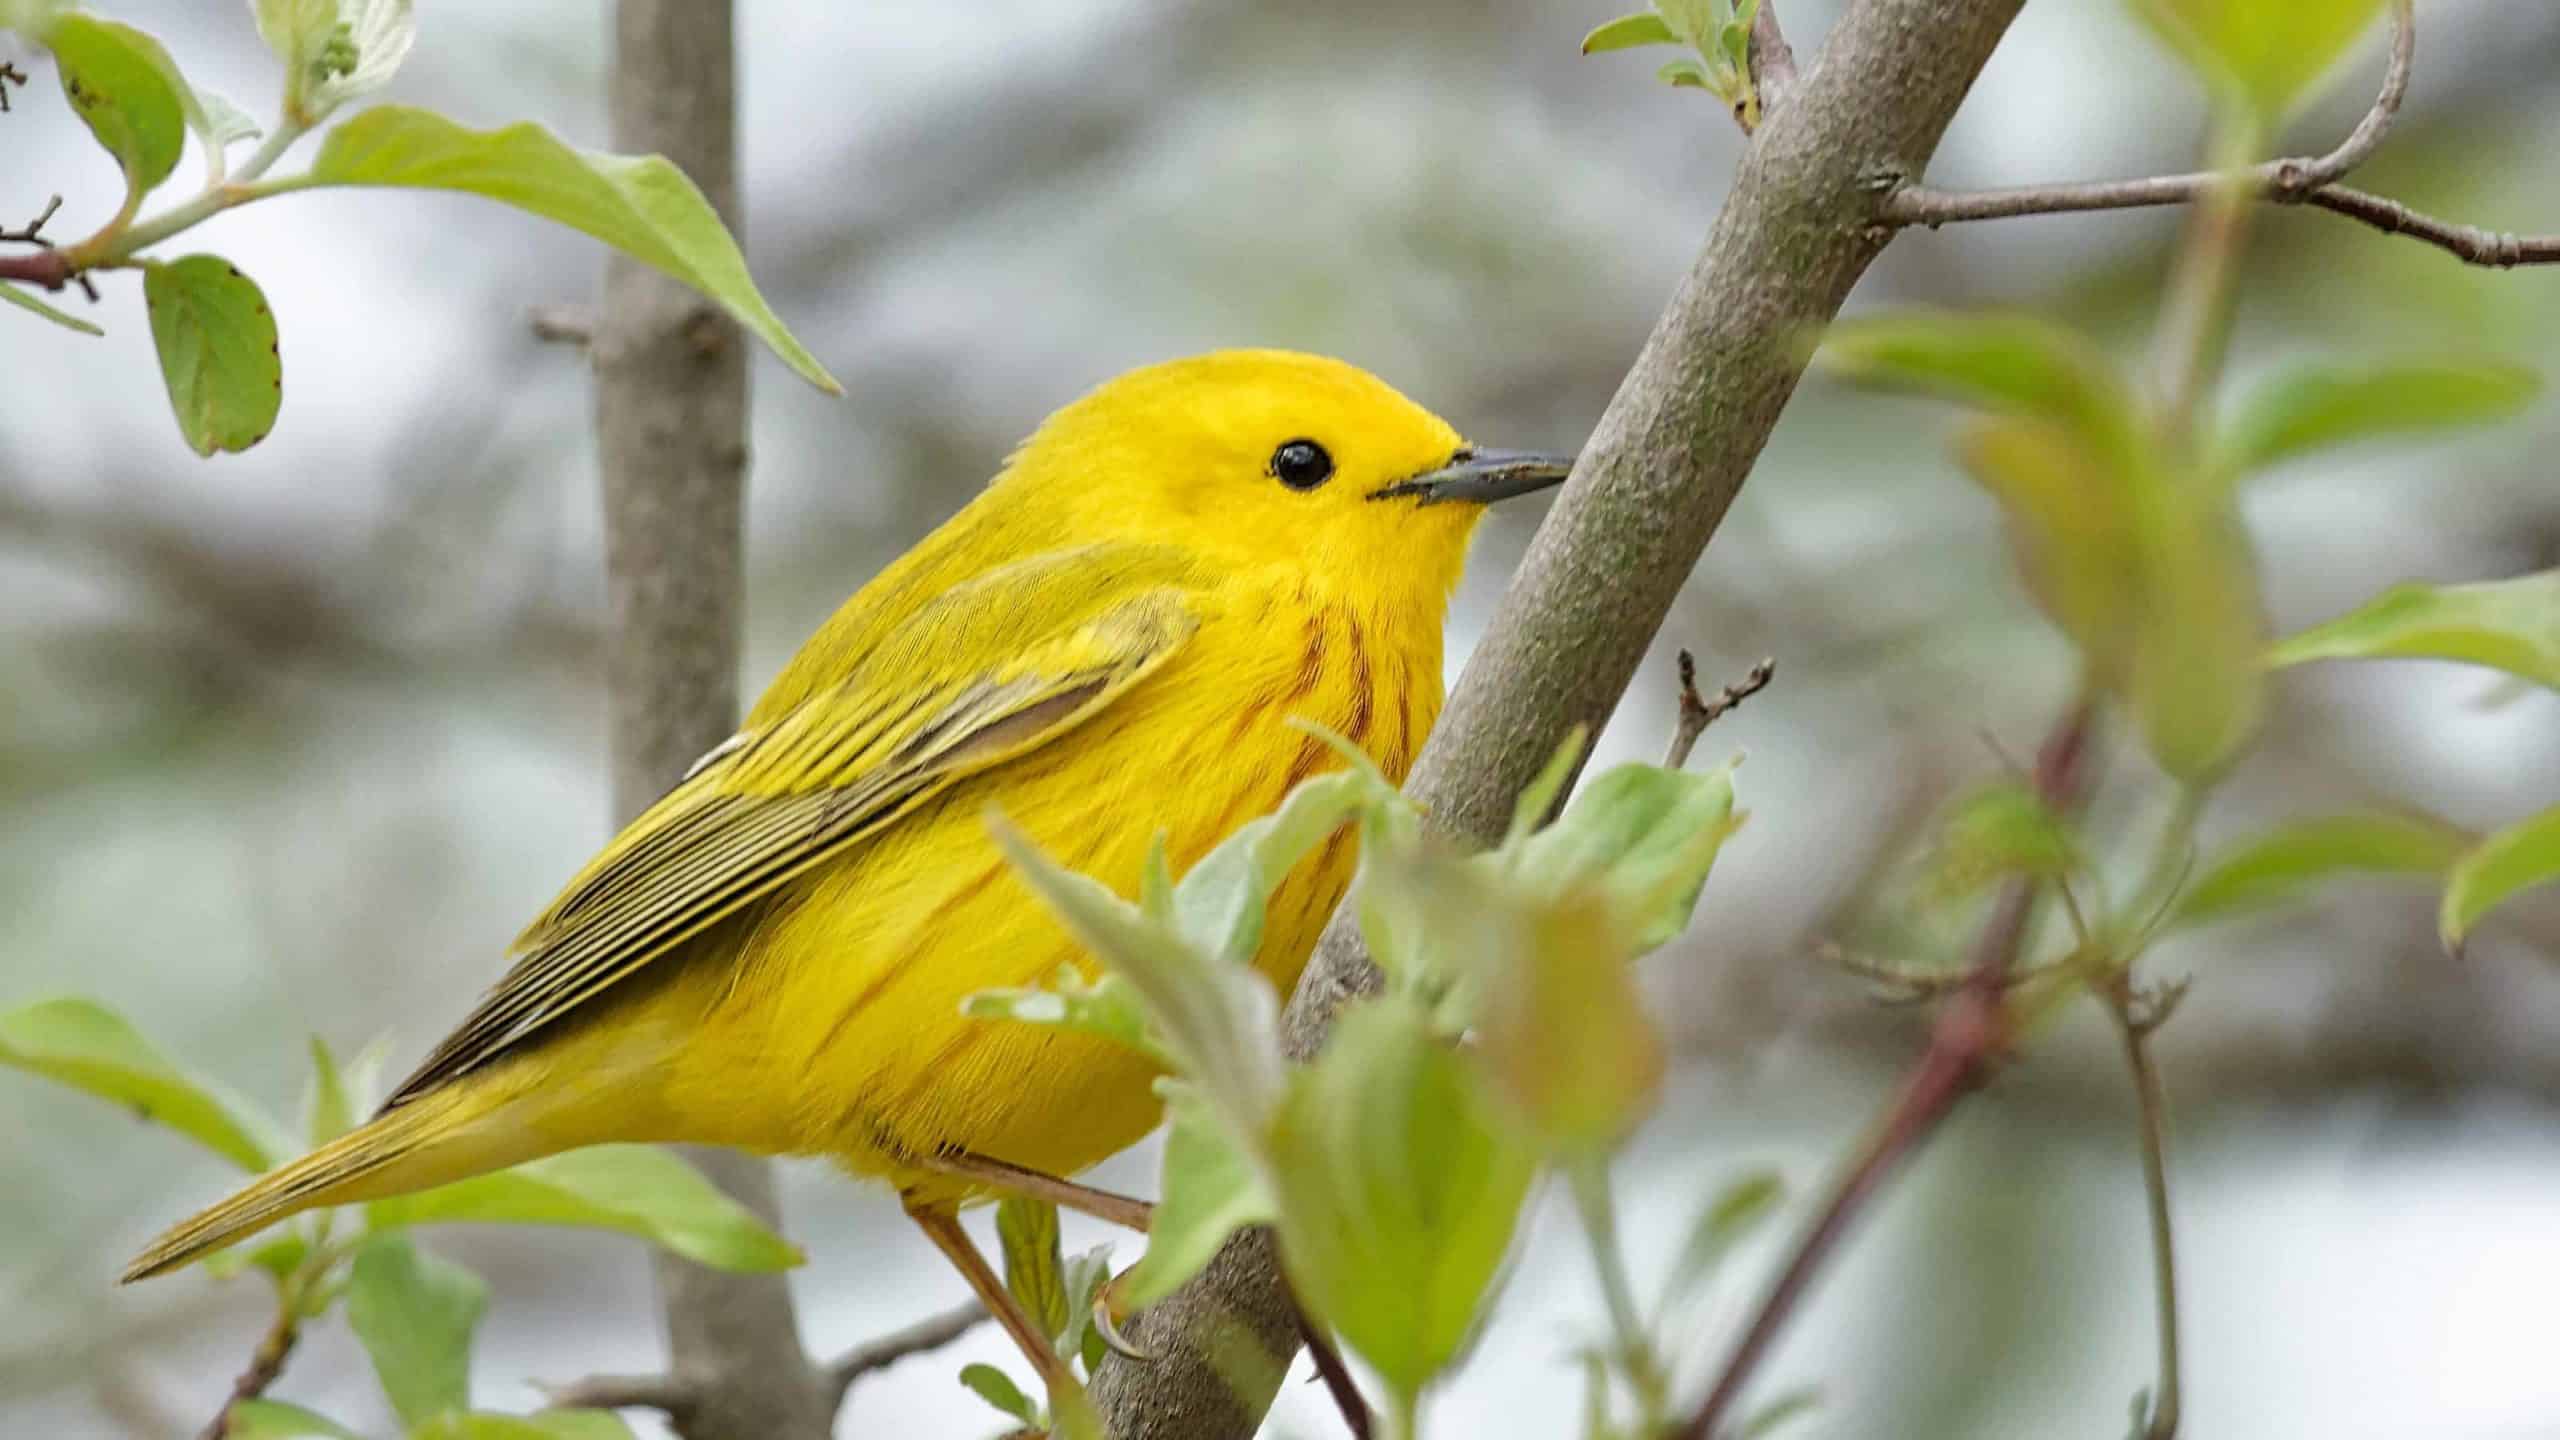 Warblers return to the Berkshires in May. This yellow warbler perches alertly on a branch.